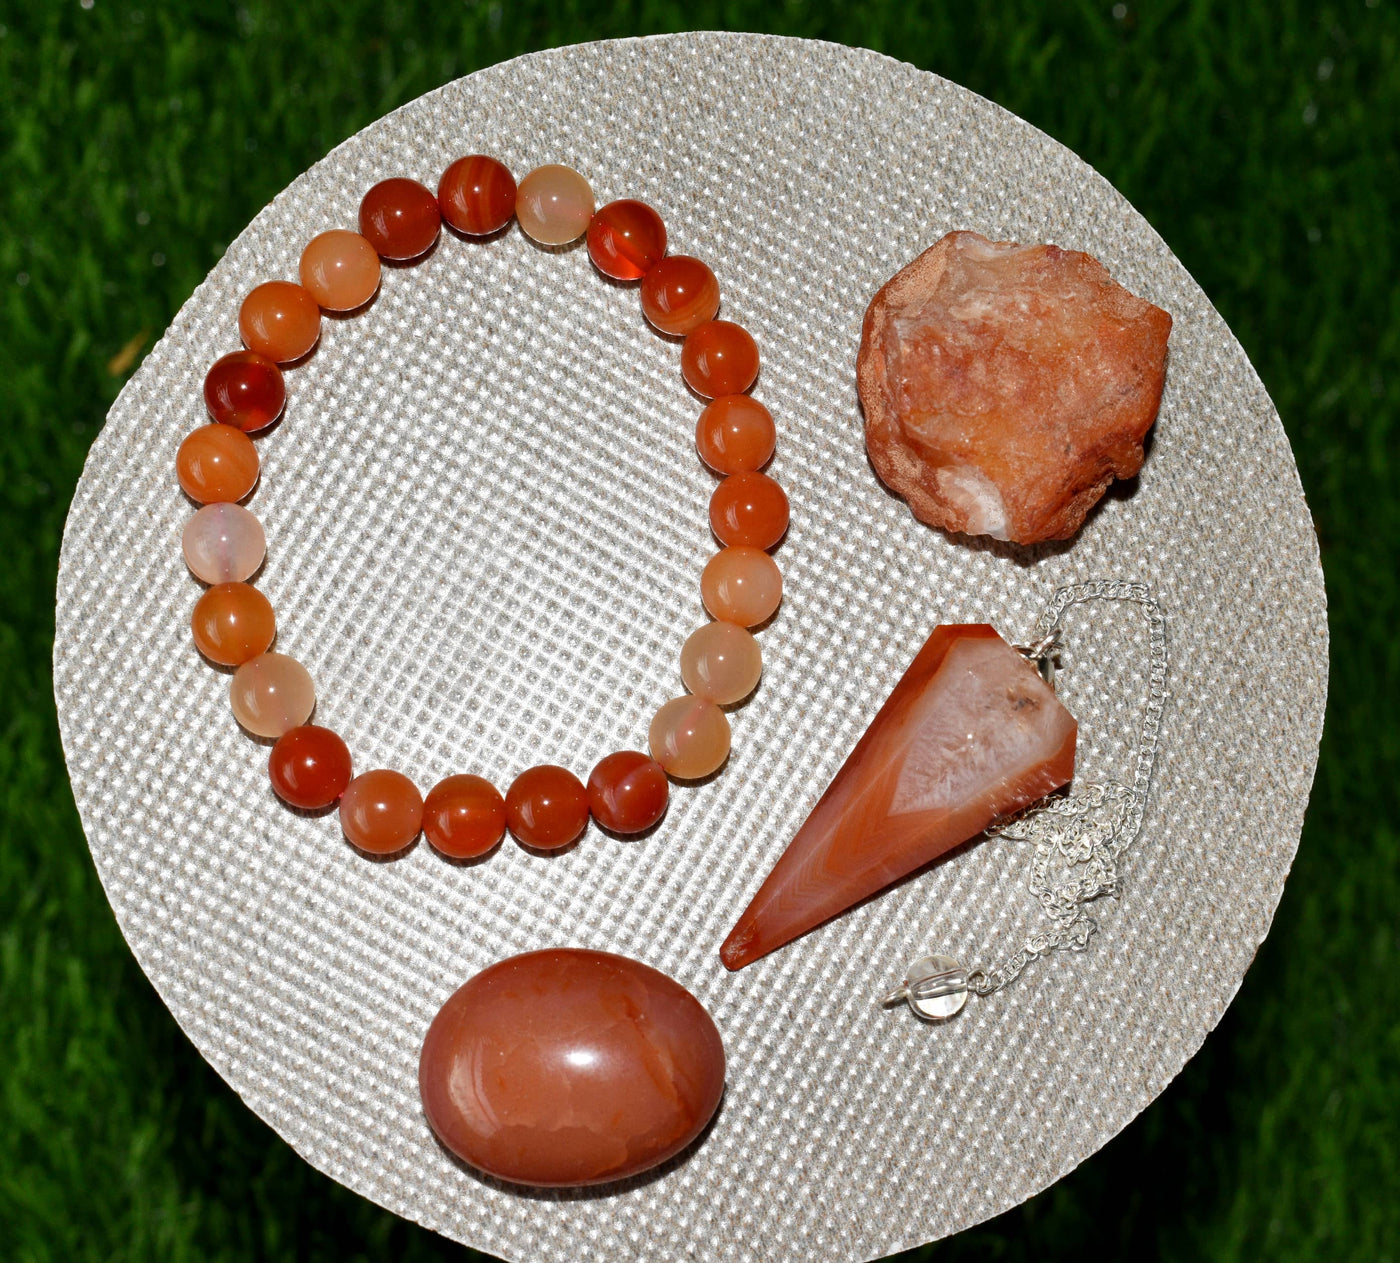 Carnelian Crystal Gift Set For Emotional Support and Protection, Real Polished Gemstones.